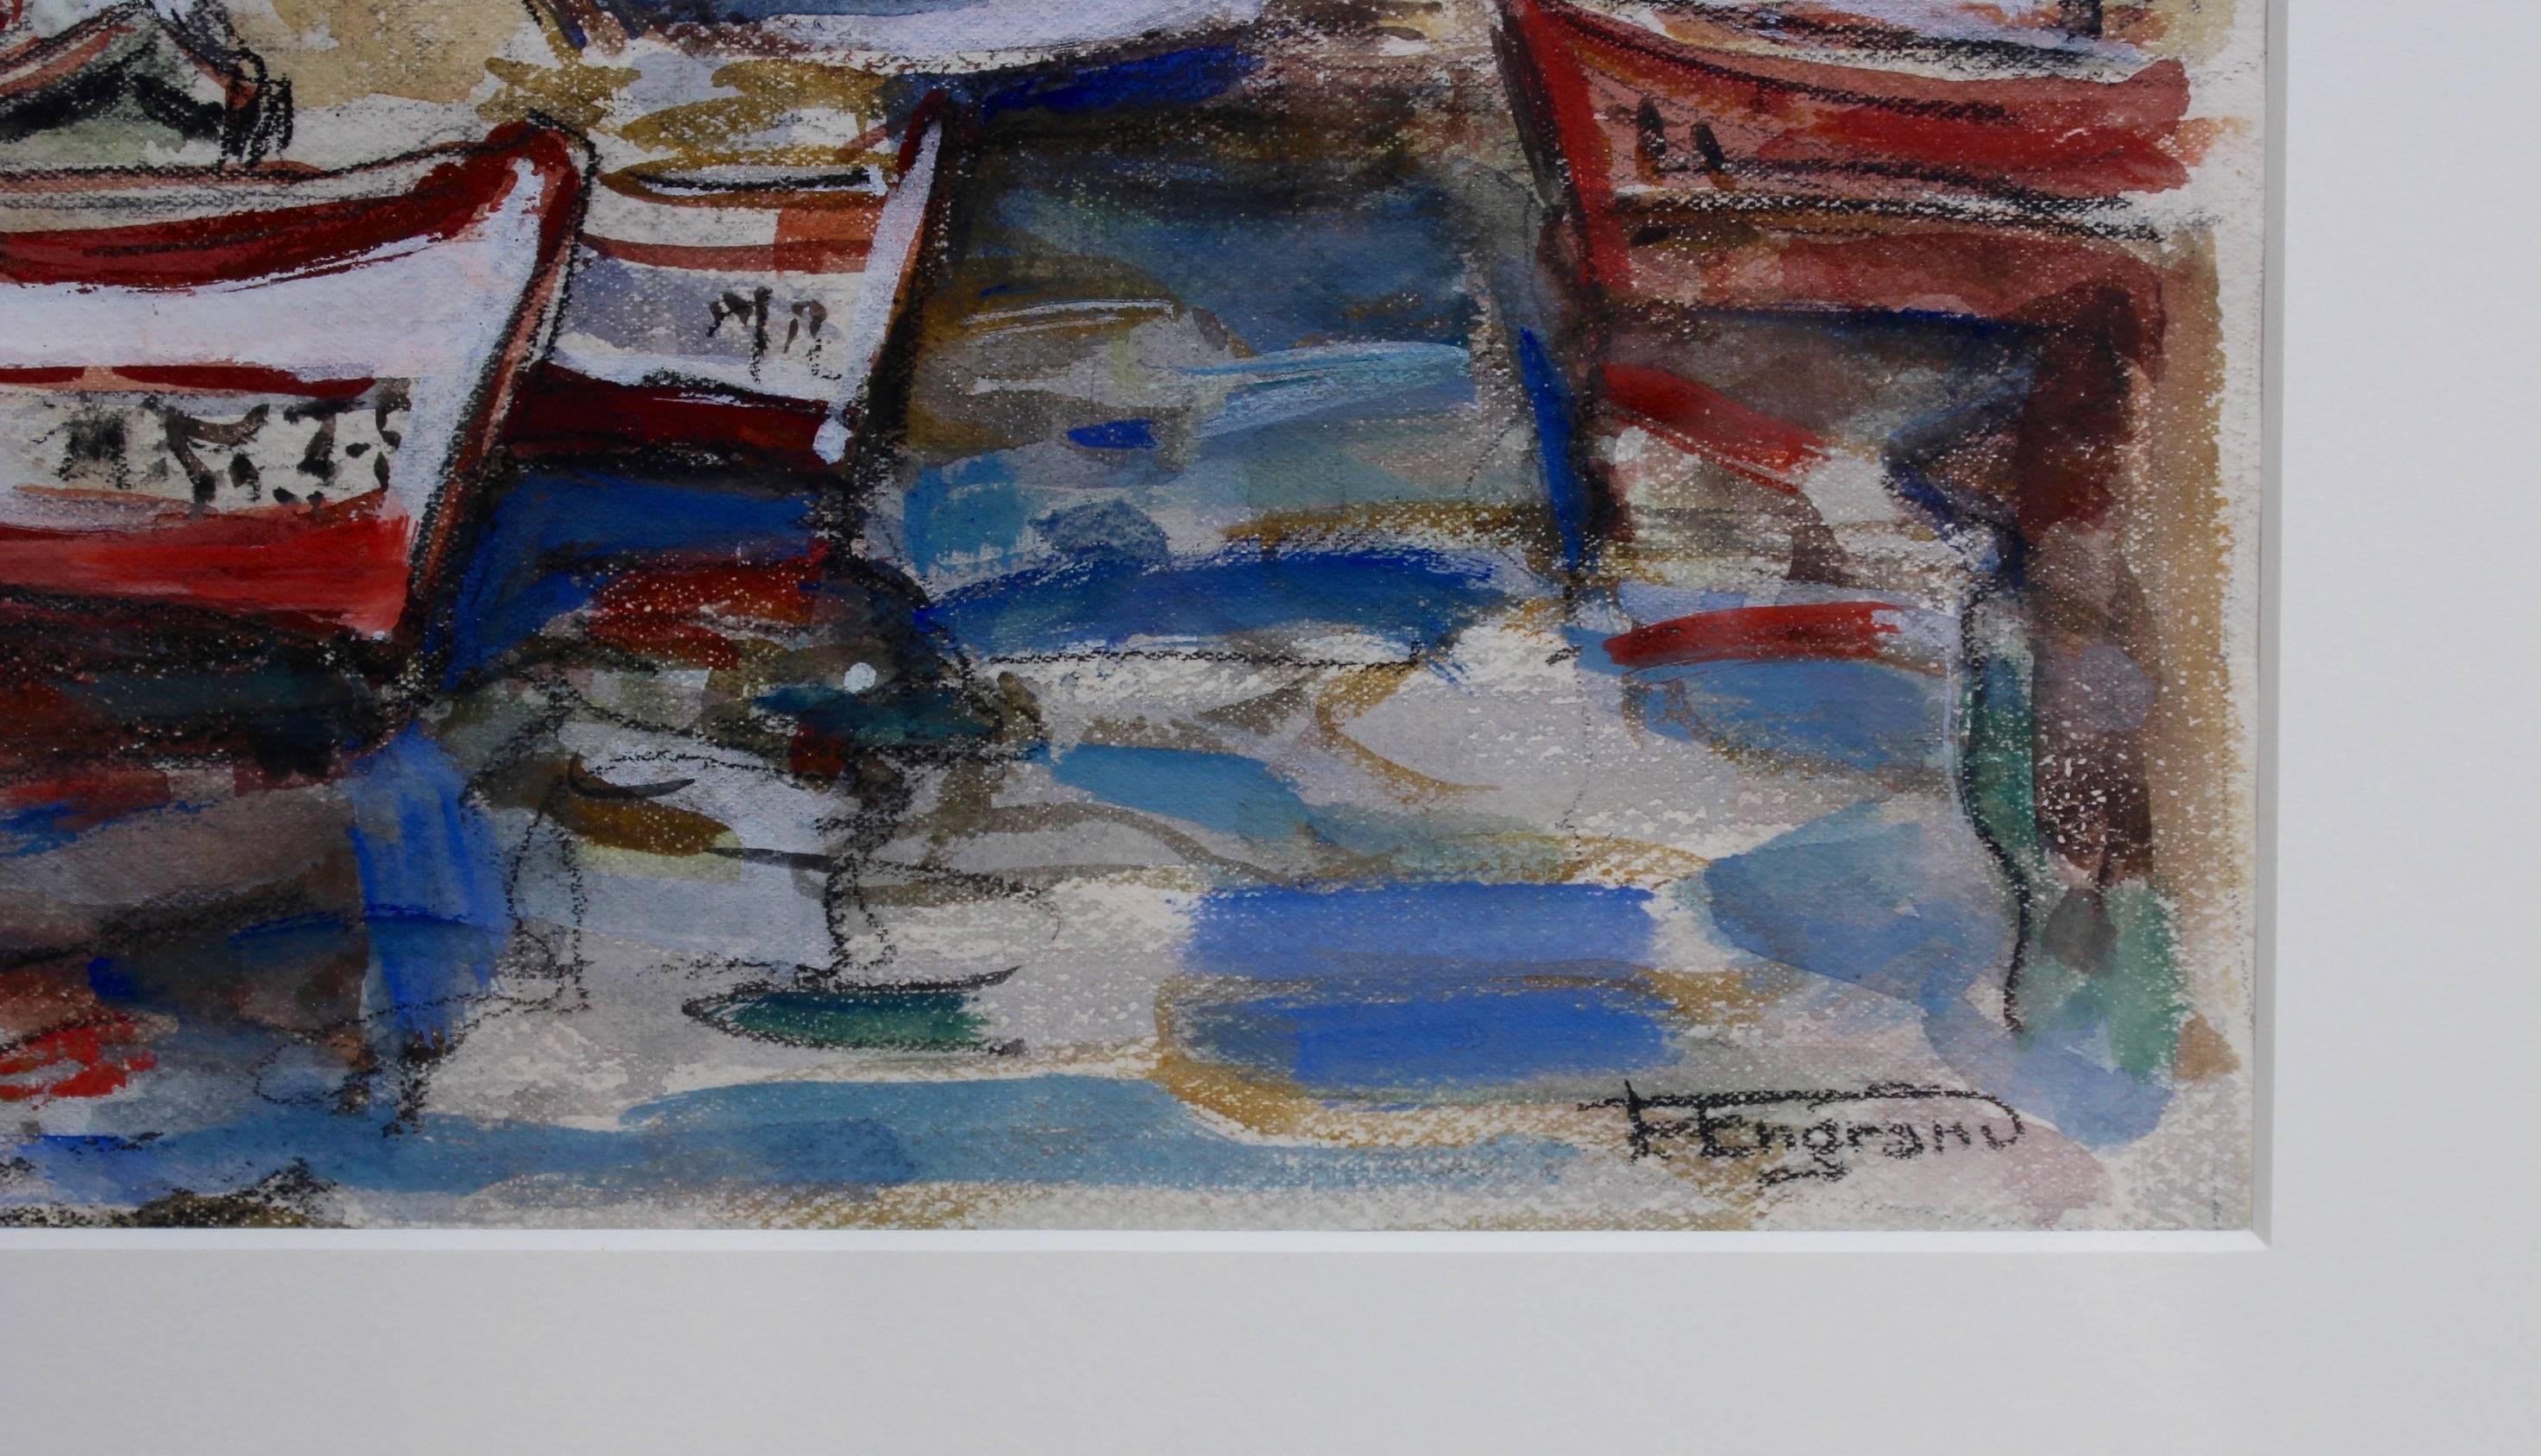 'Mediterranean Fishing Village' by F Engram - Gray Figurative Painting by Unknown